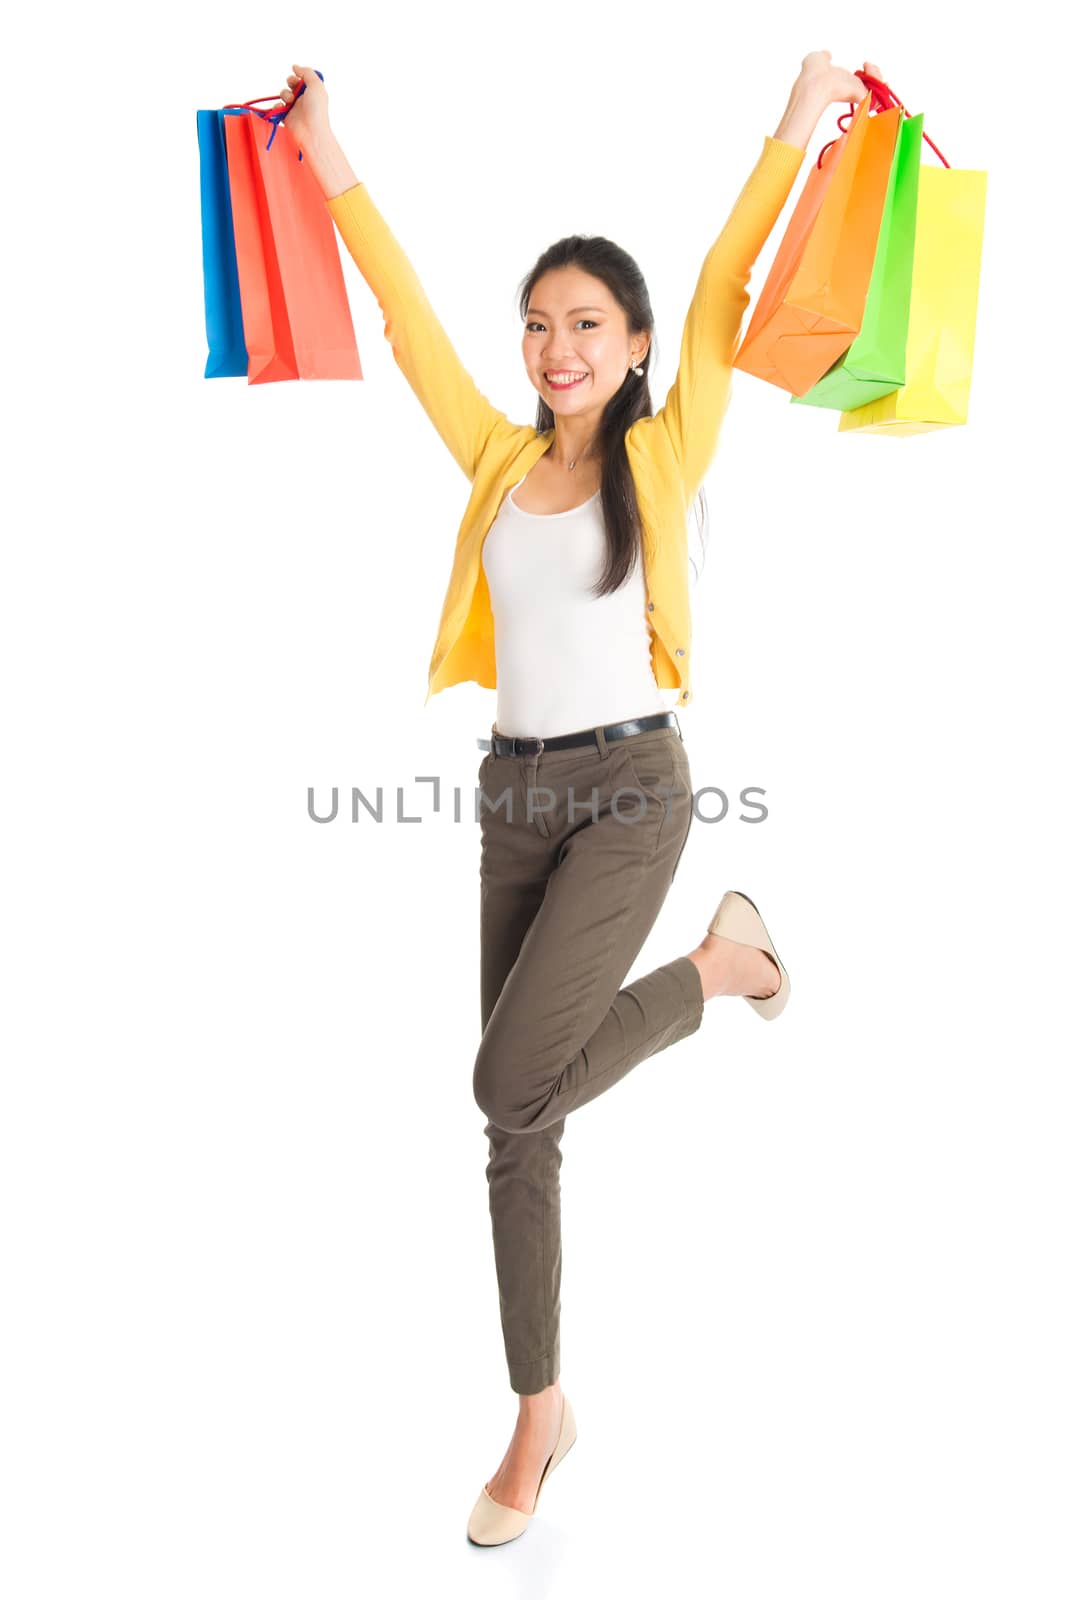 Happy young Asian girl shopper, hands outstretched holding shopping bags and smiling, full length isolated standing on white background.